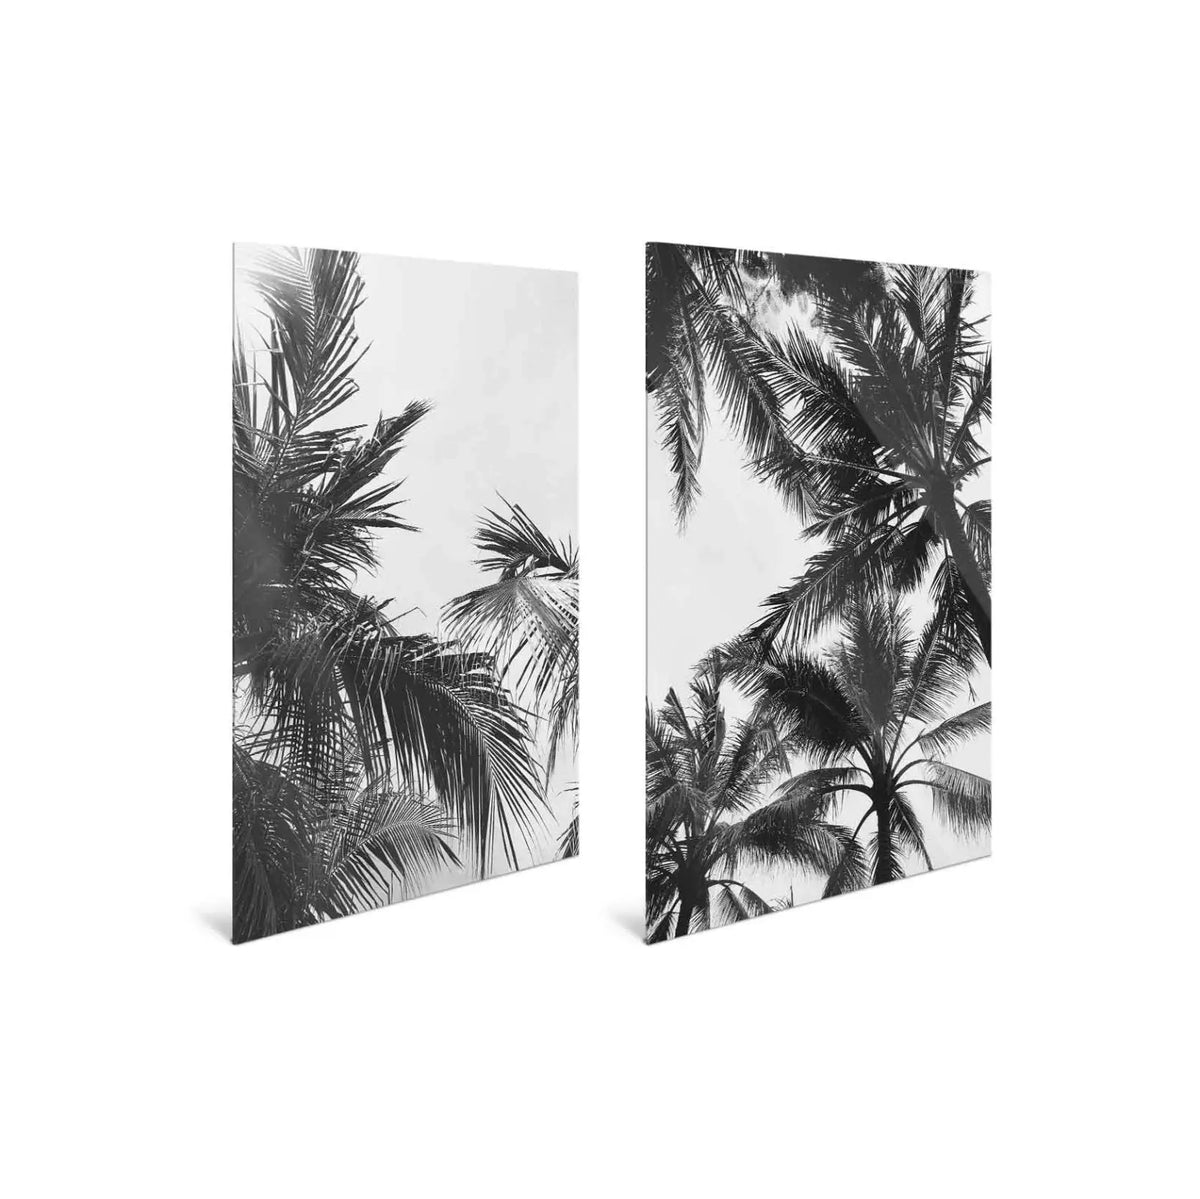 "PALM DUO" - Art For Everyone